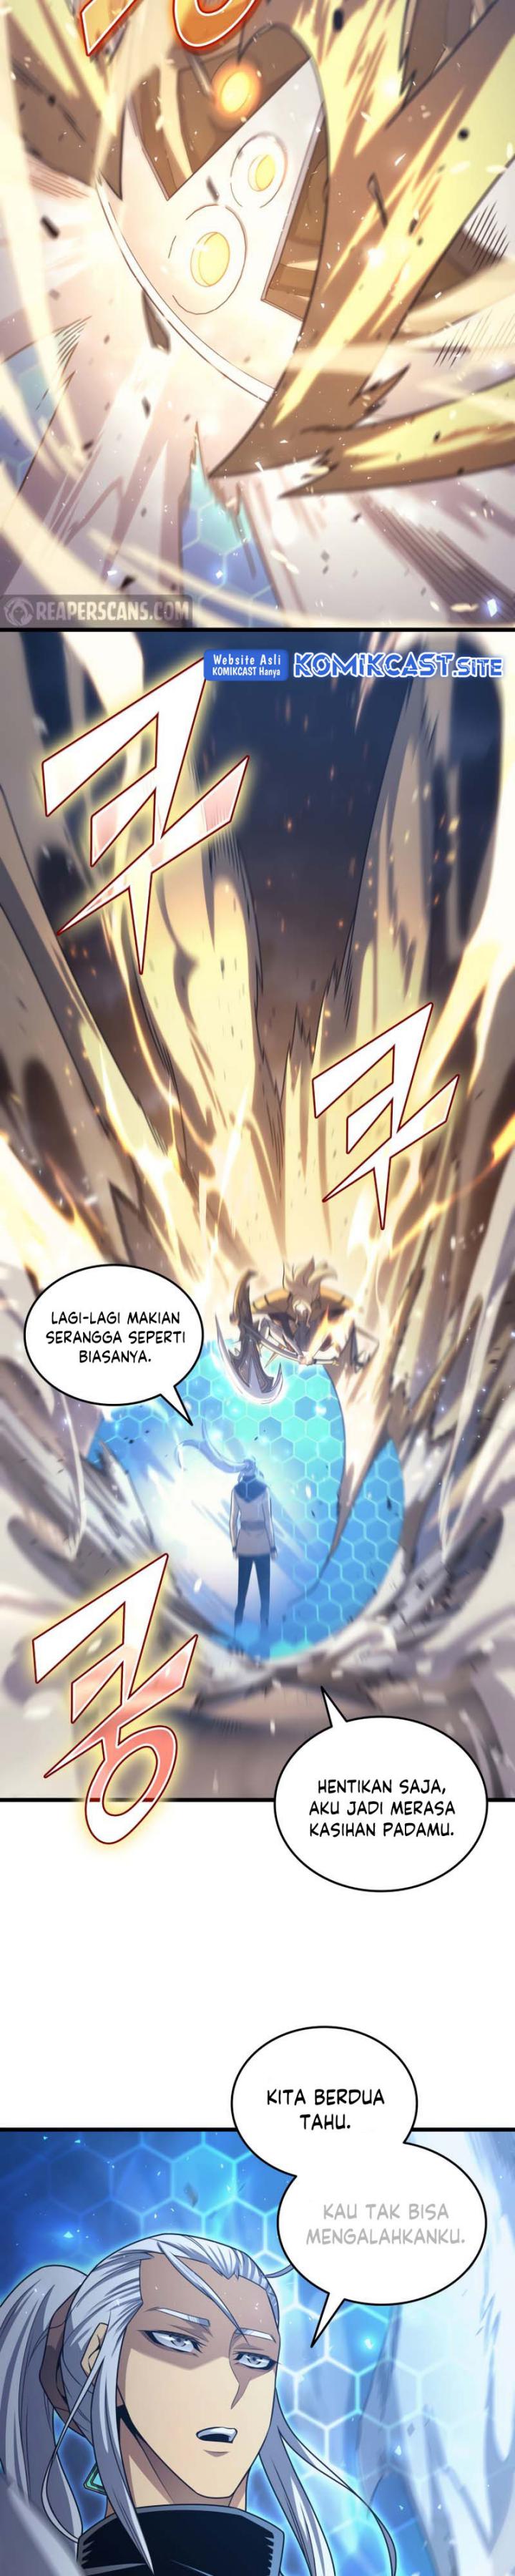 The Great Mage Returns After 4000 Years Chapter 152